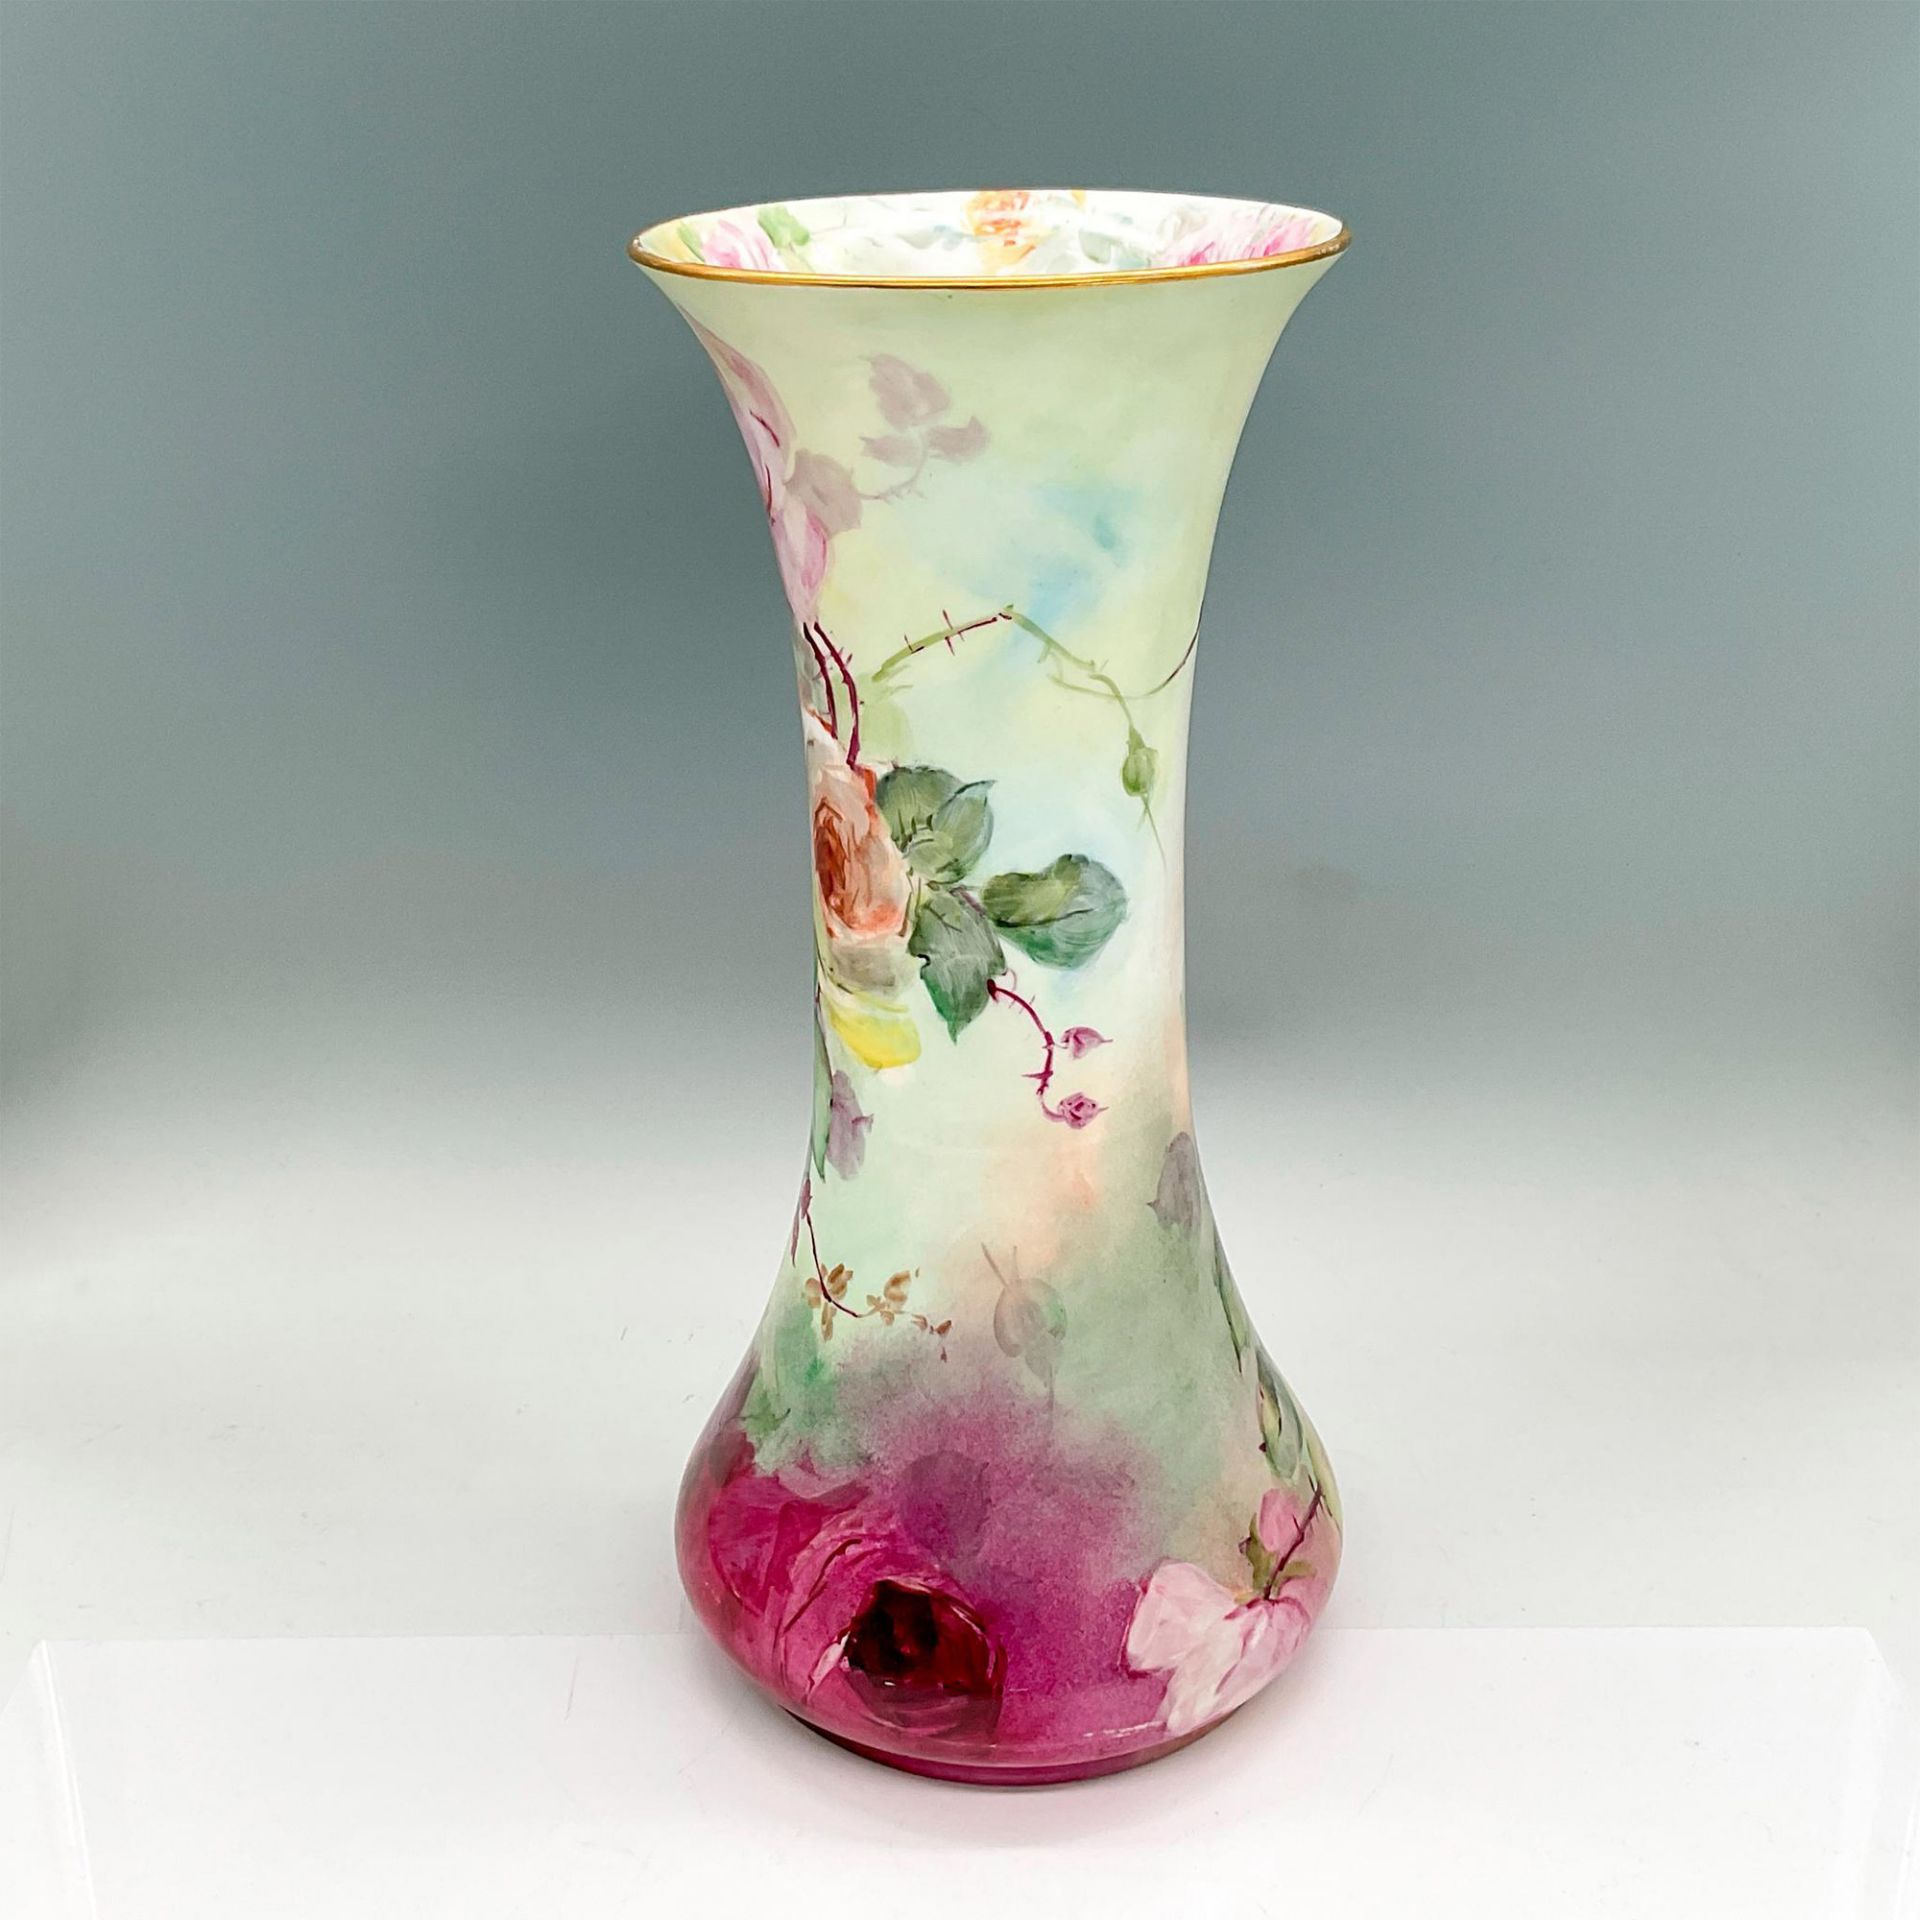 Delinieres and Co. Limoges Vase, Pink Roses - Image 2 of 3